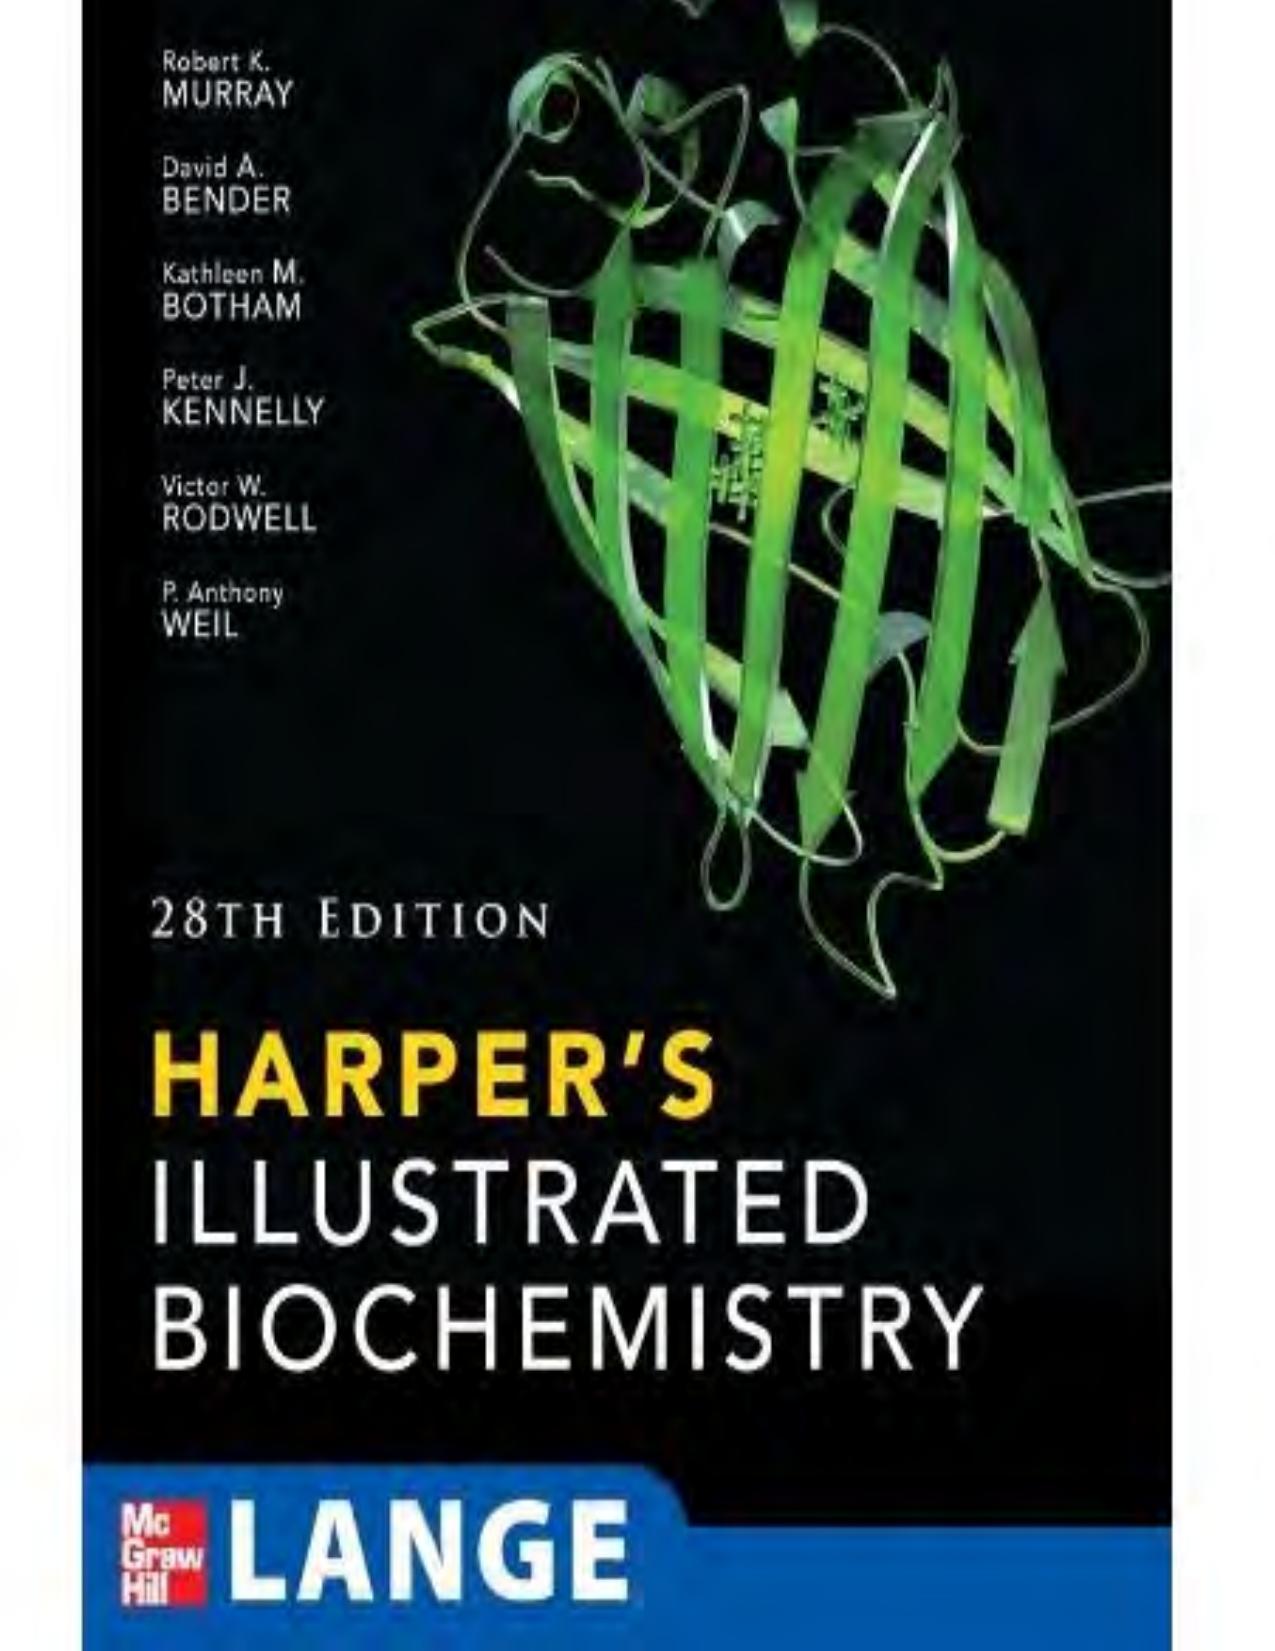 harpers illustrated biochemistry, 28th edition 2009